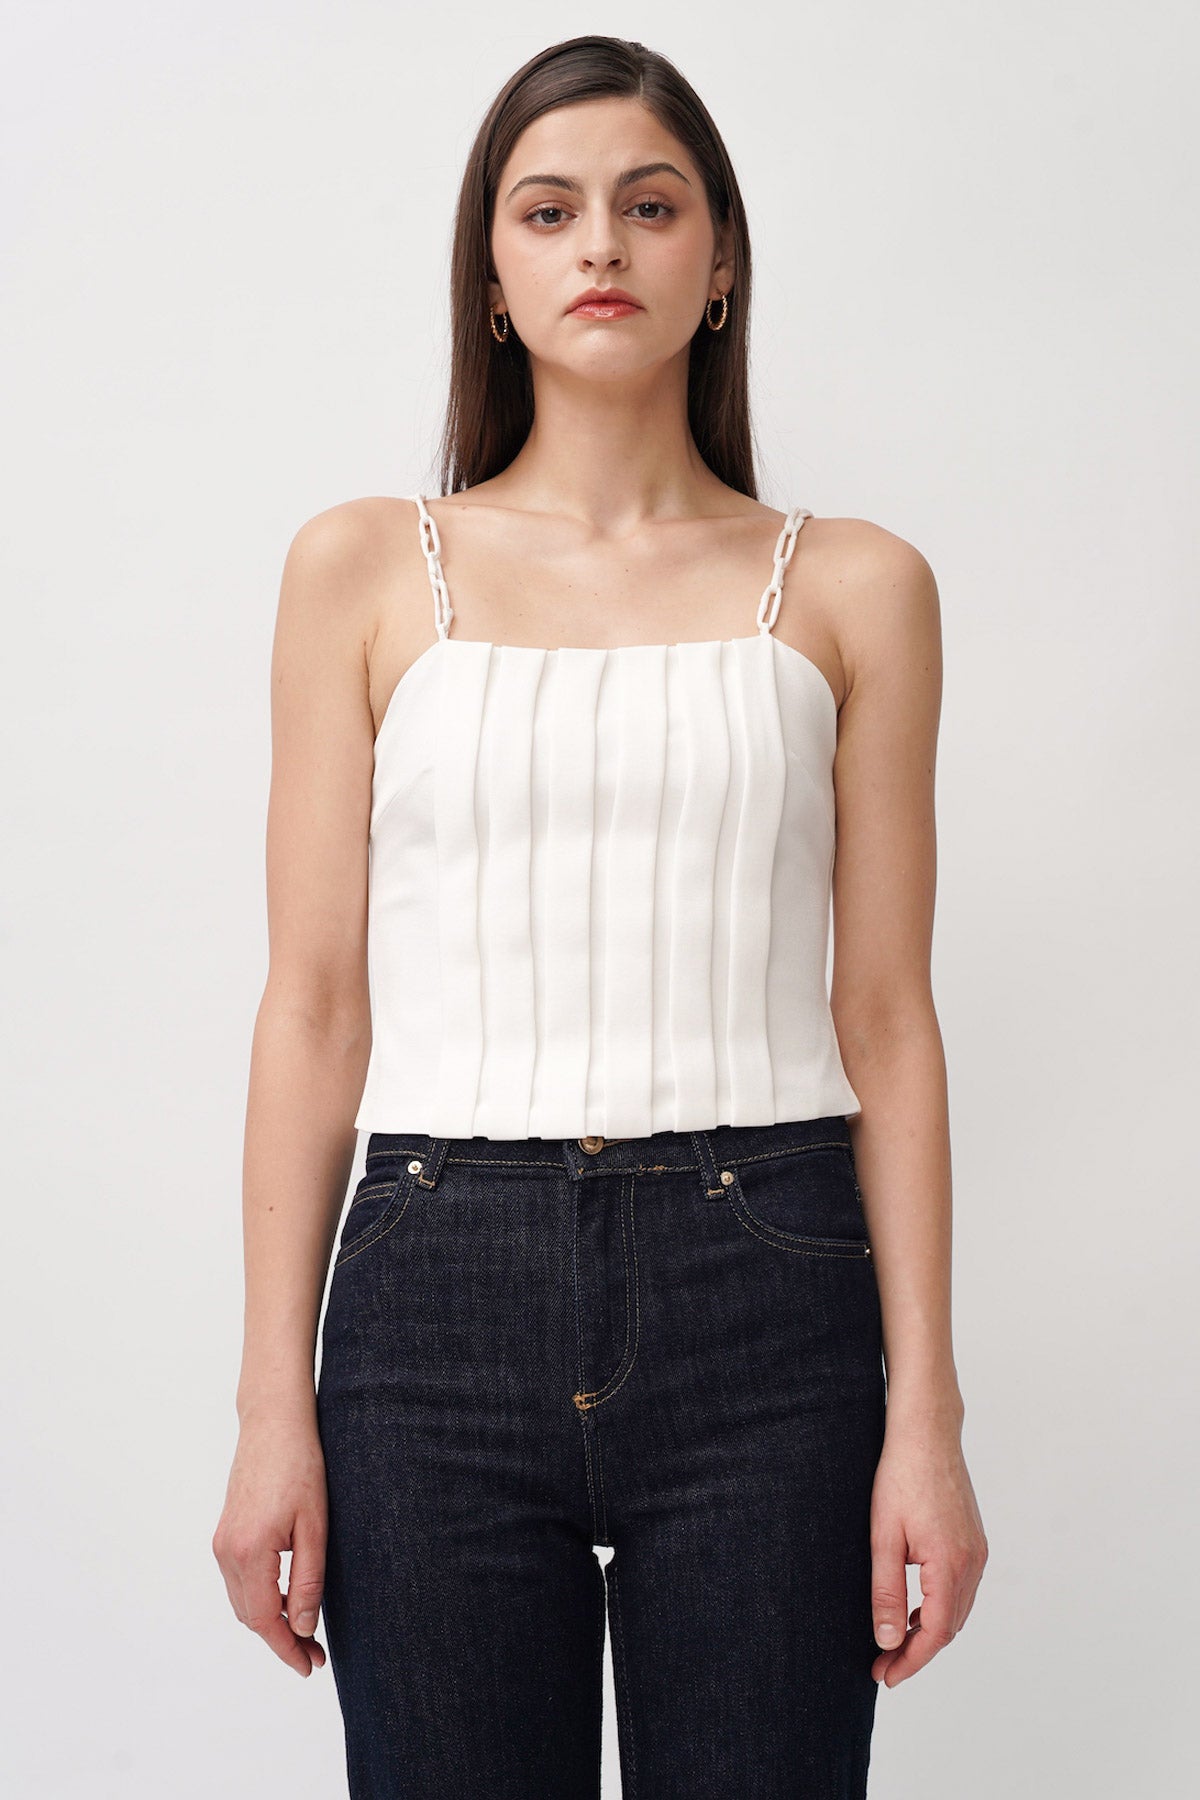 Pina Pleated Top In Broken White (2 LEFT)